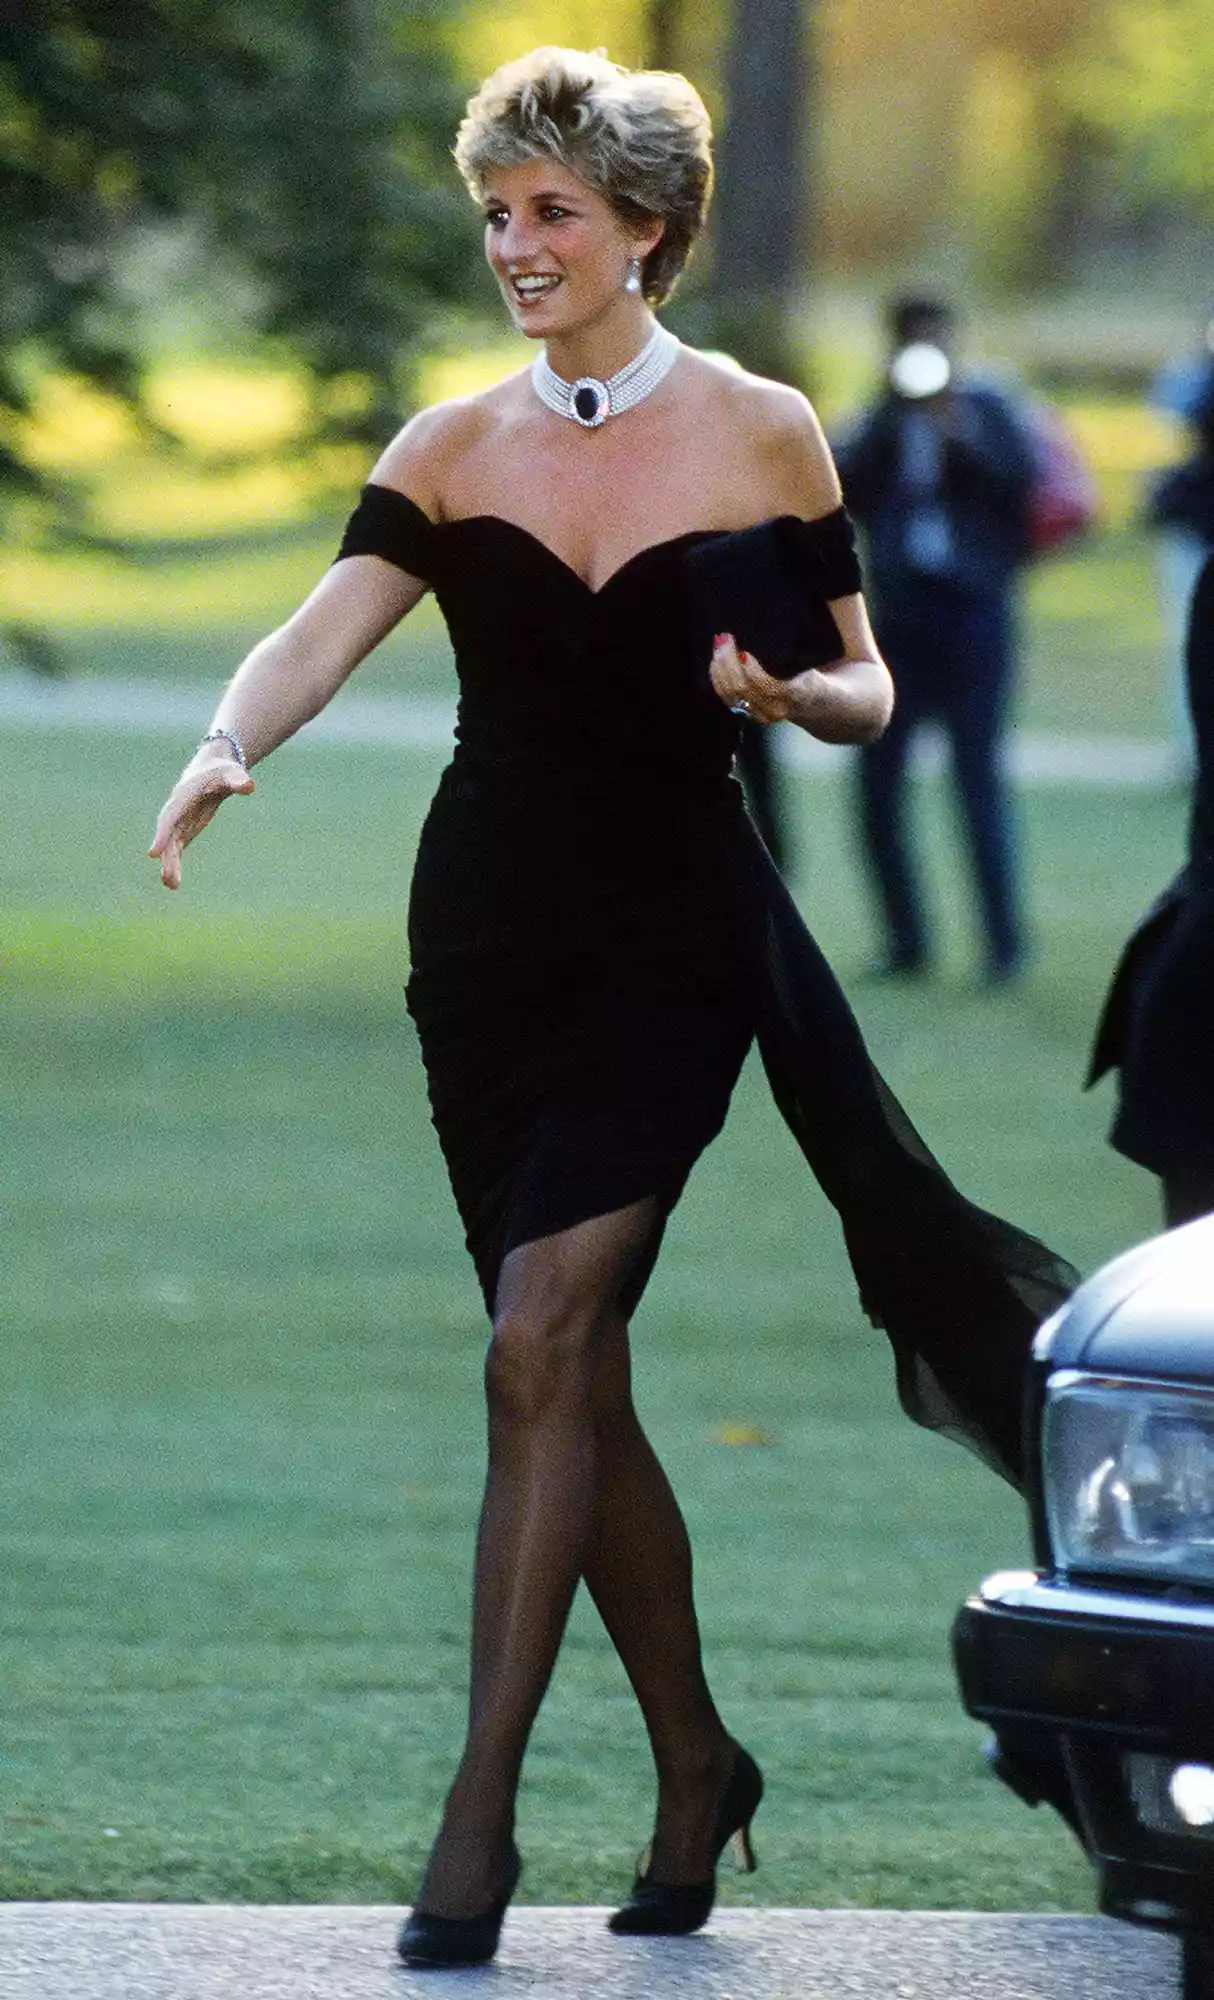 Princess Diana (1961 - 1997) arriving at the Serpentine Gallery, London, in a gown by Christina Stambolian, June 1994